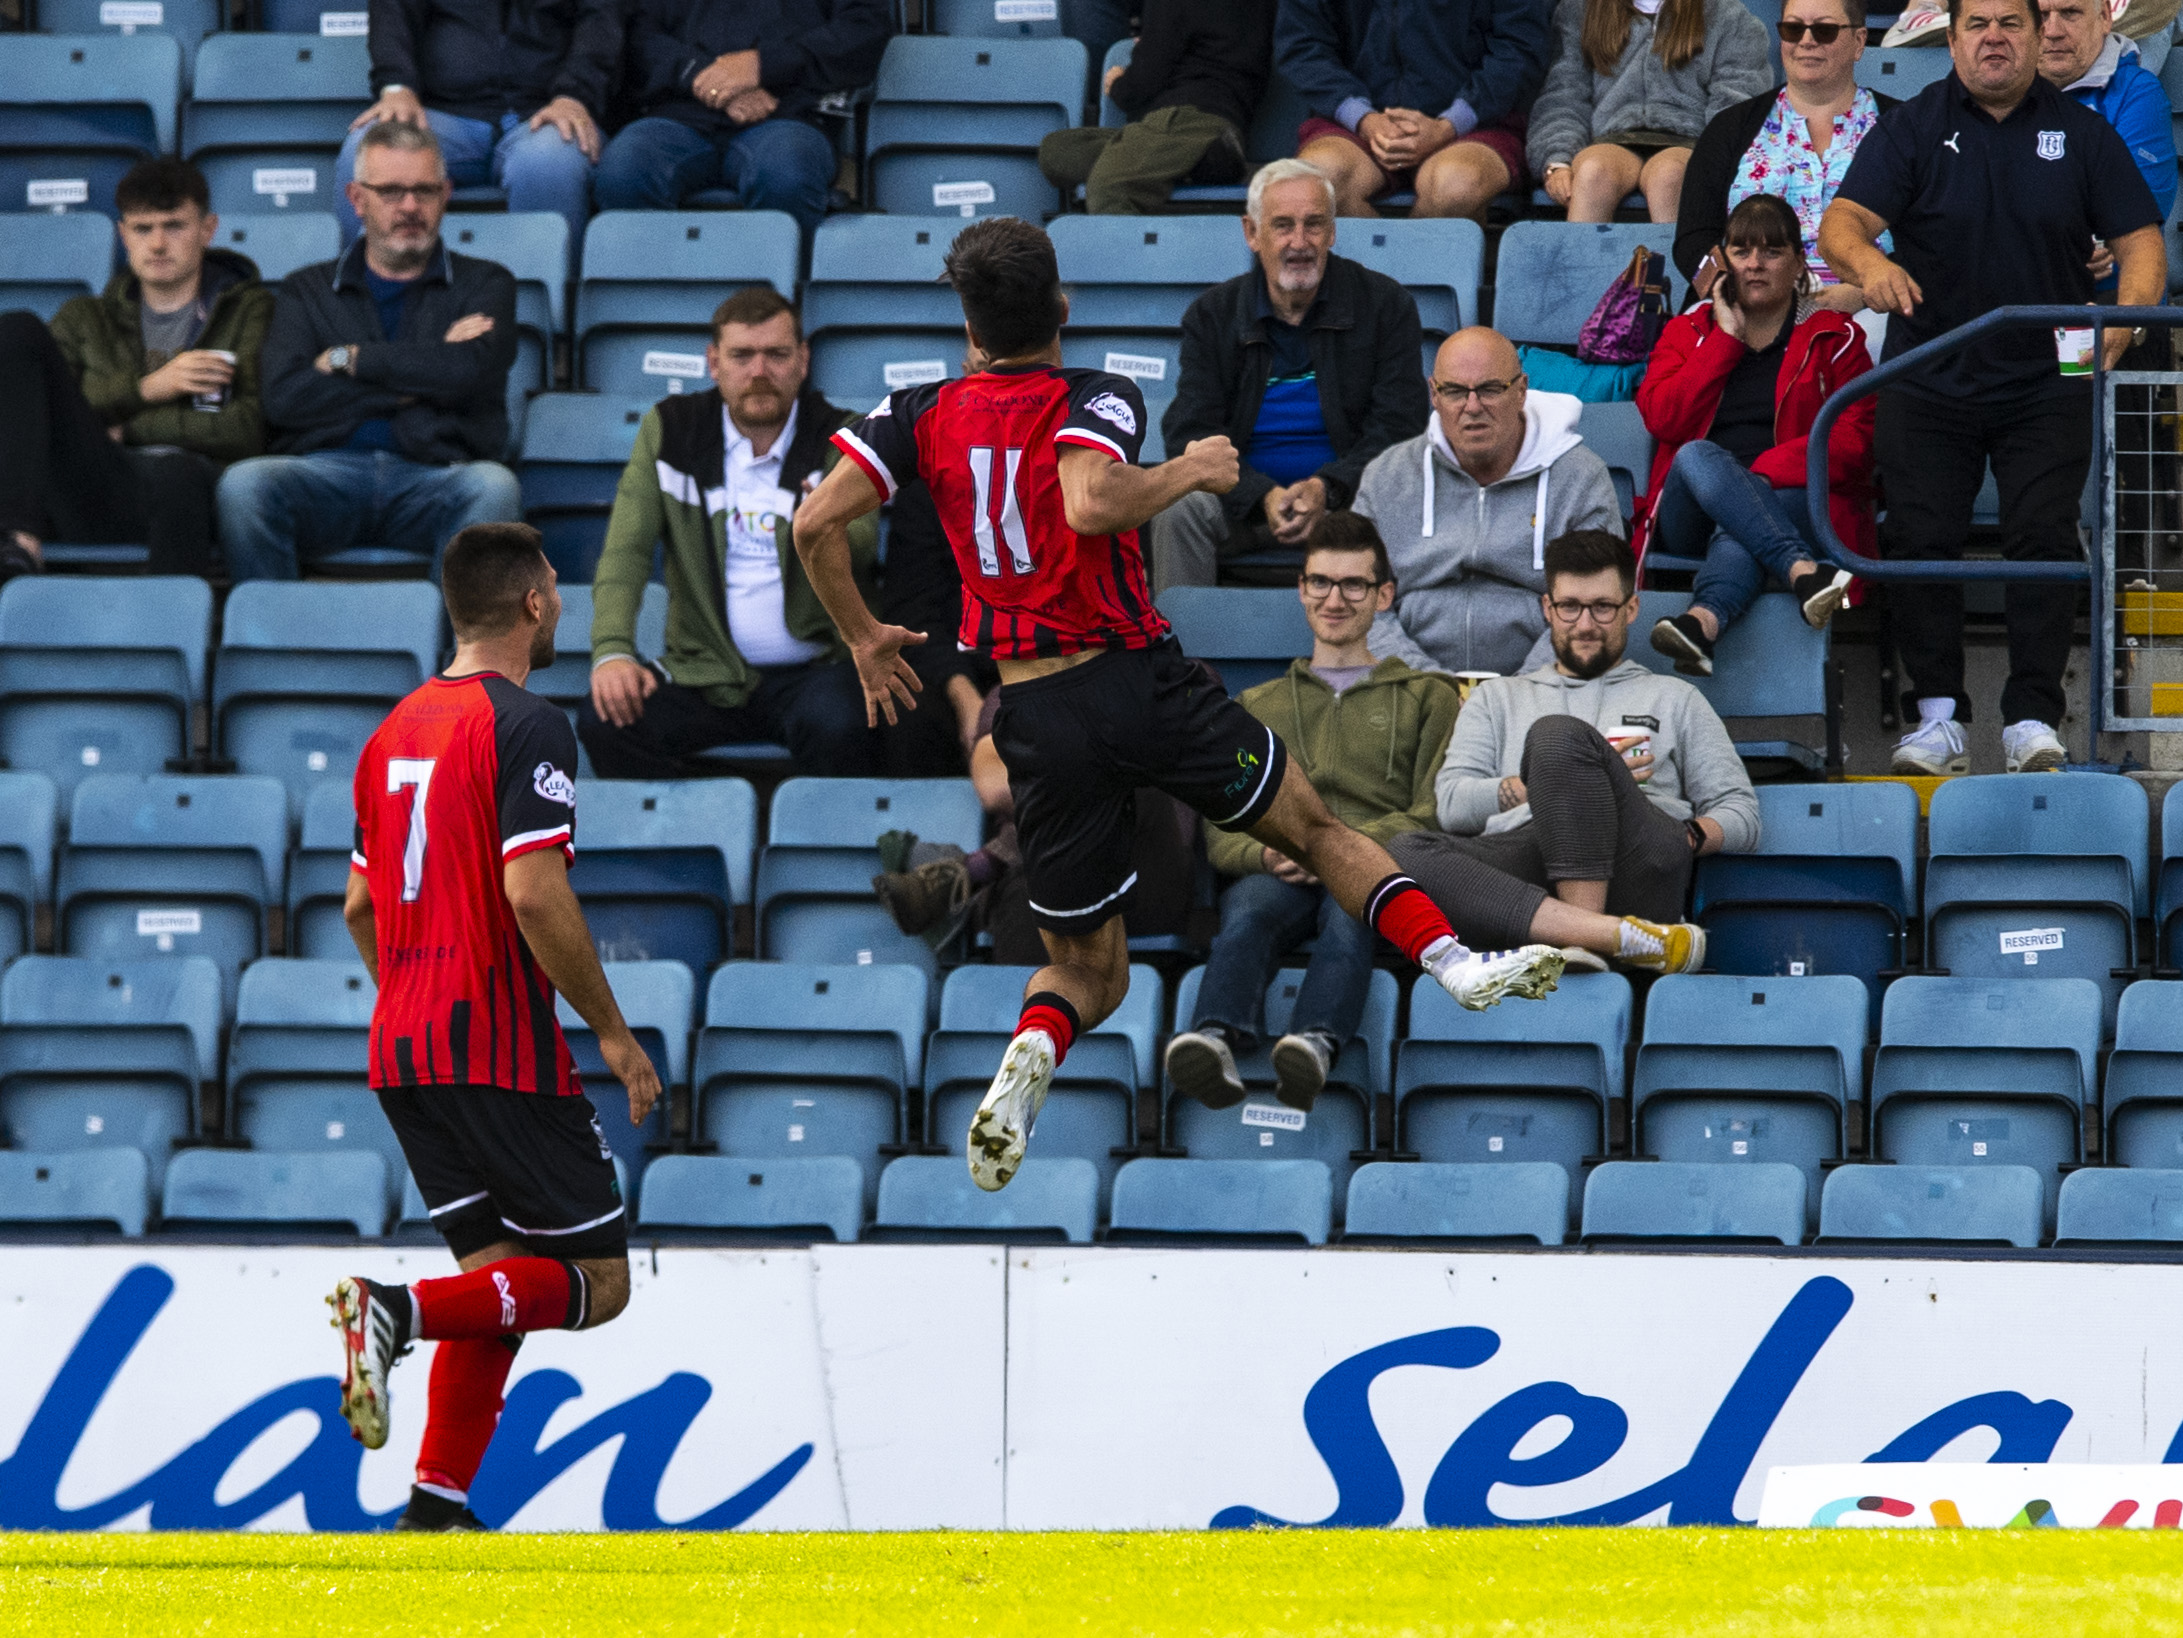 Rabin Omar celebrates in front of the Dundee fans.